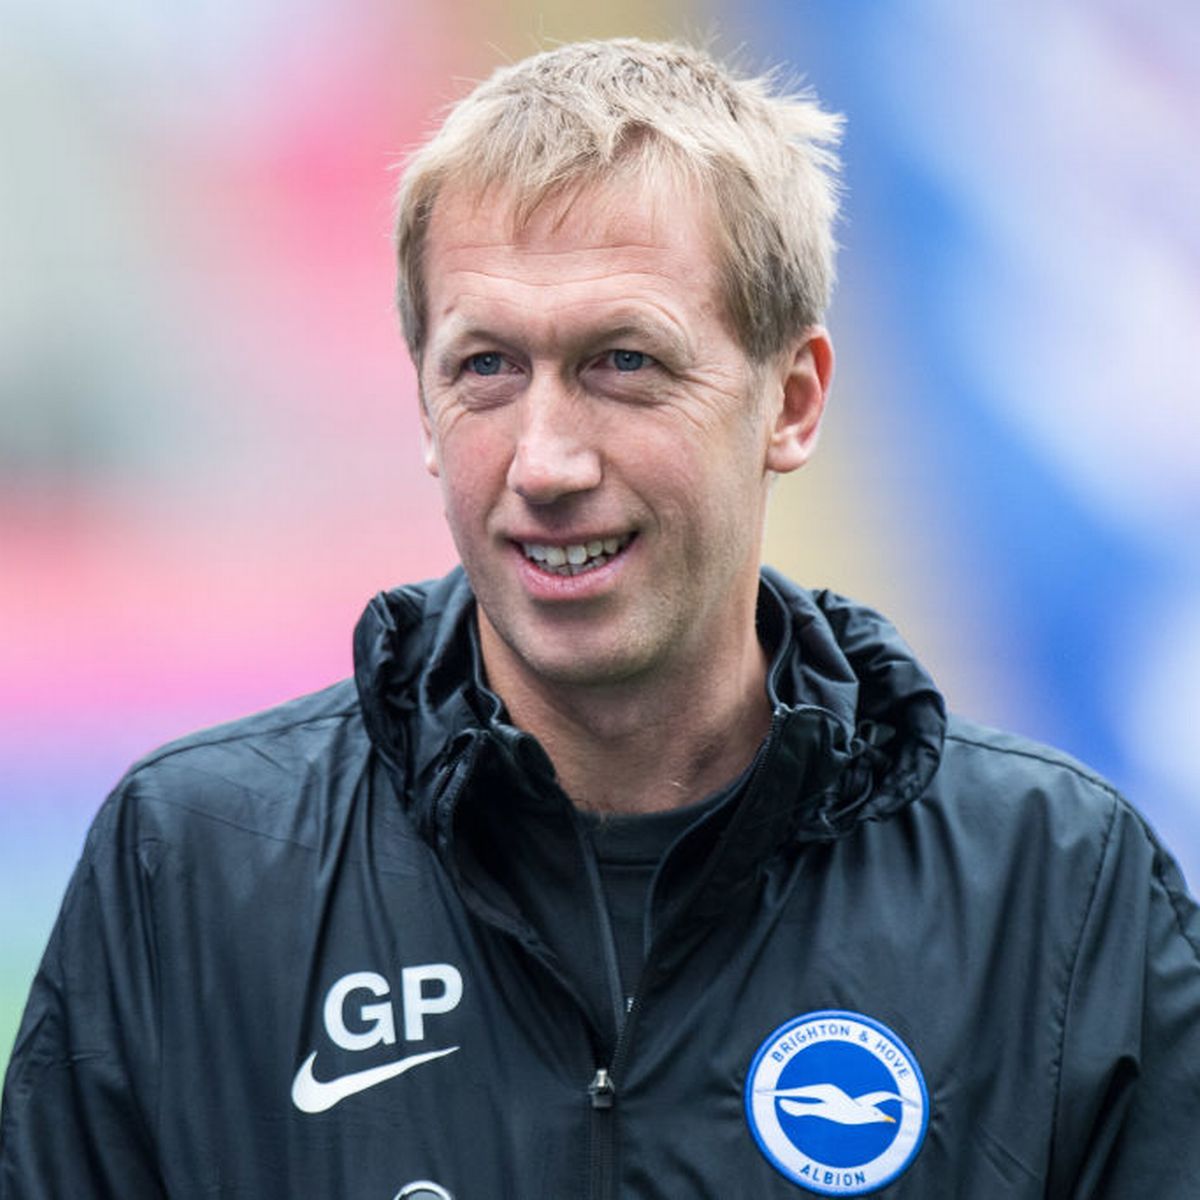 Graham Potter agrees to become new Chelsea head coach after Thomas Tuchel exit